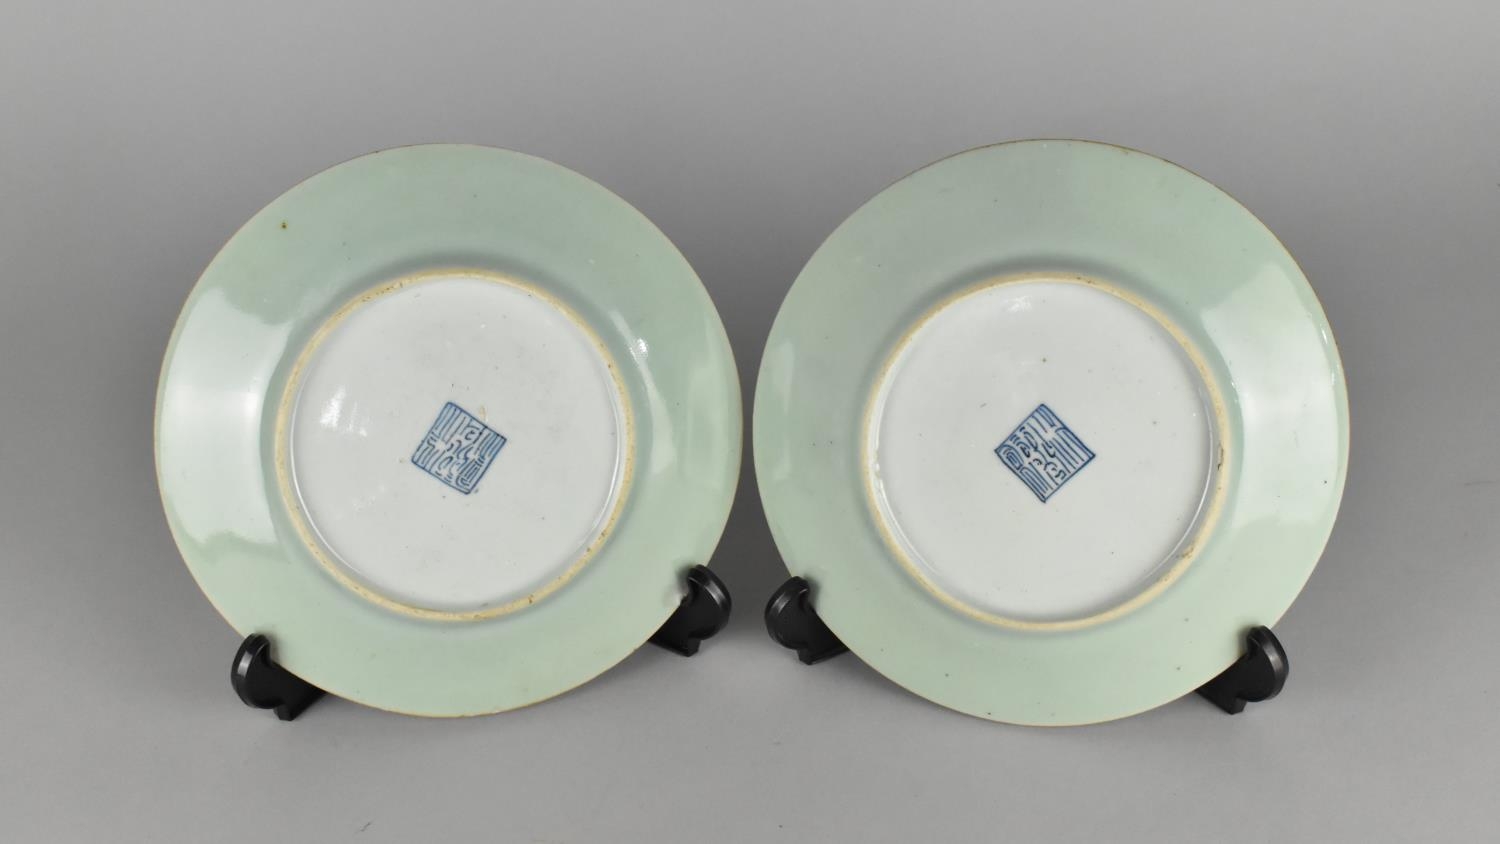 A Pair of Late Qing Dynasty Celadon Glazed Plates Decorated in the Famille Rose Palette with Birds - Image 2 of 2